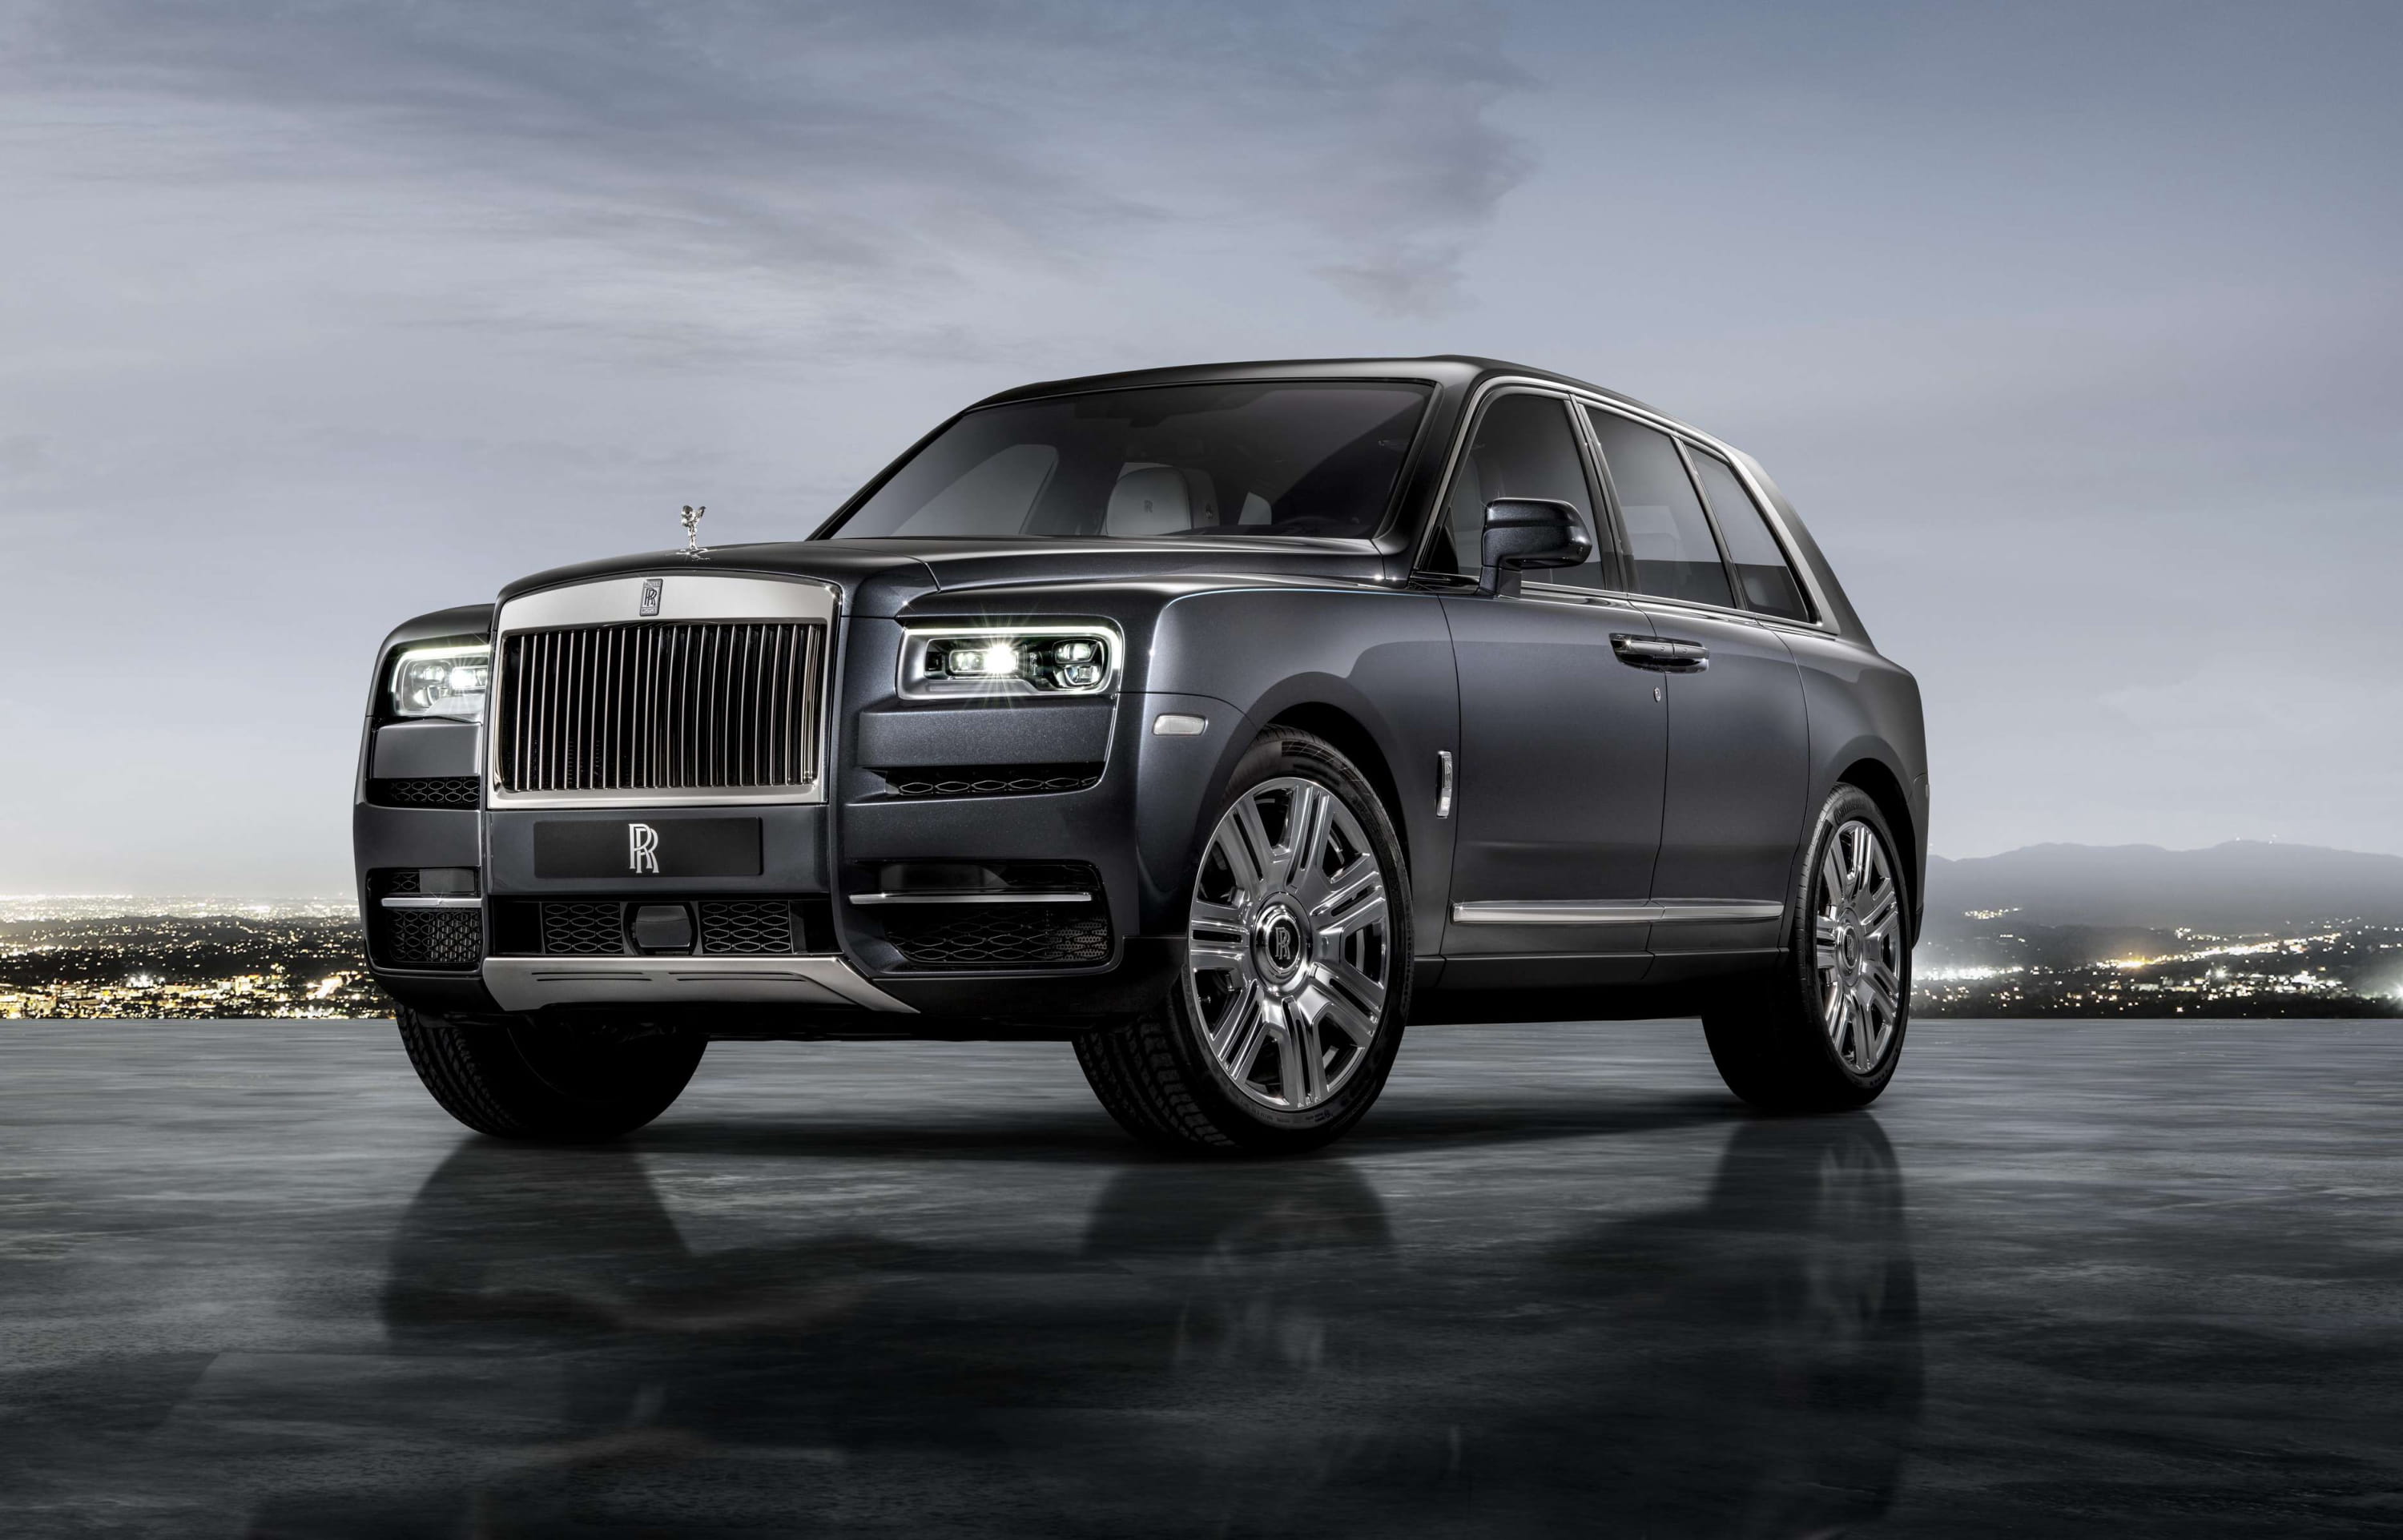 Rolls Royce Suv Used : Rolls-Royce Cullinan SUV launched in India for